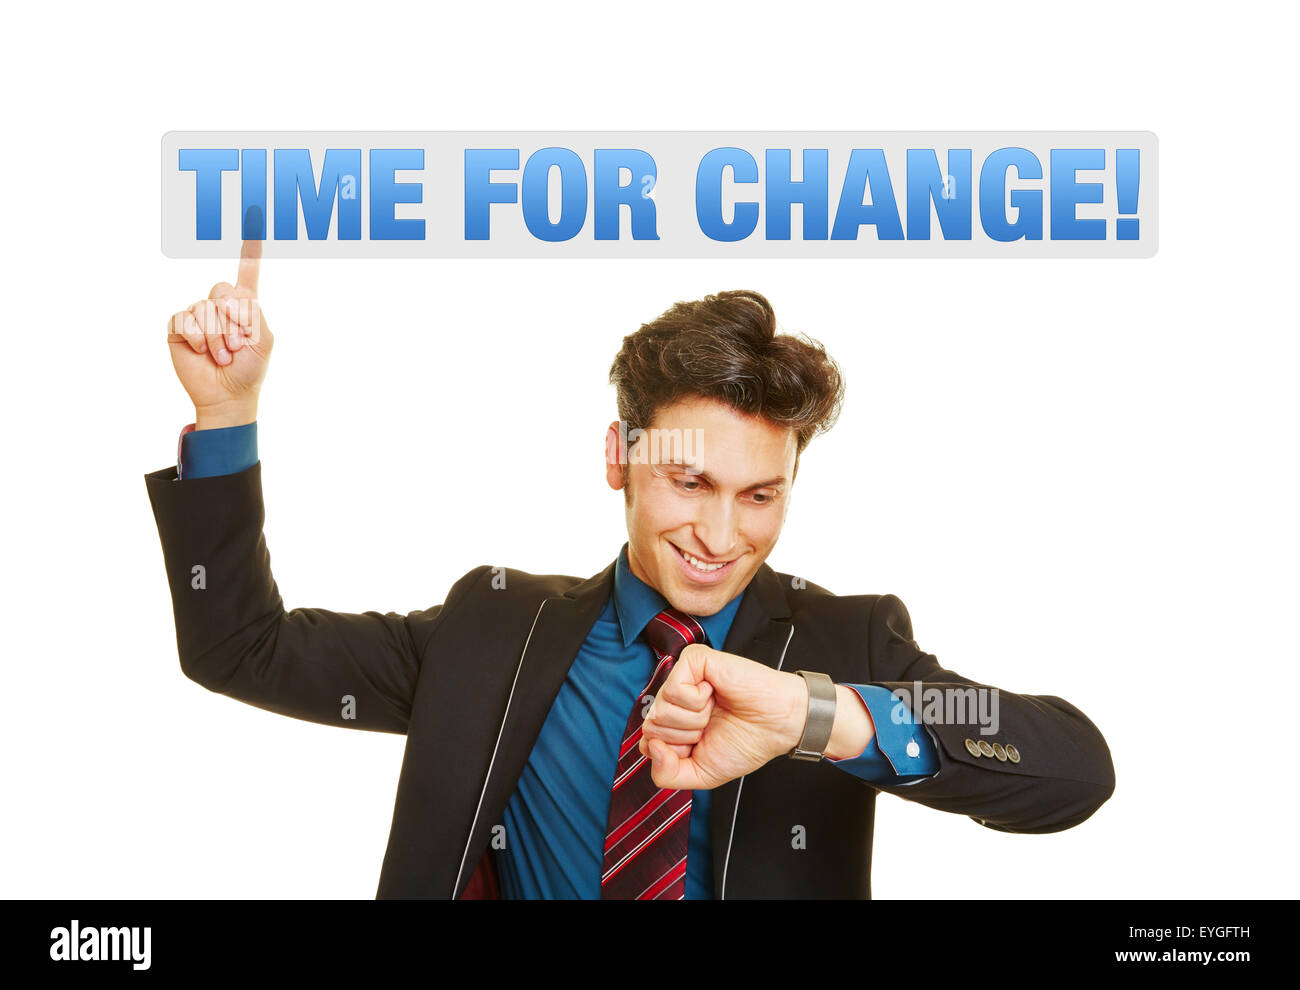 Time for Business Change! as concept for a business man checking his watch Stock Photo